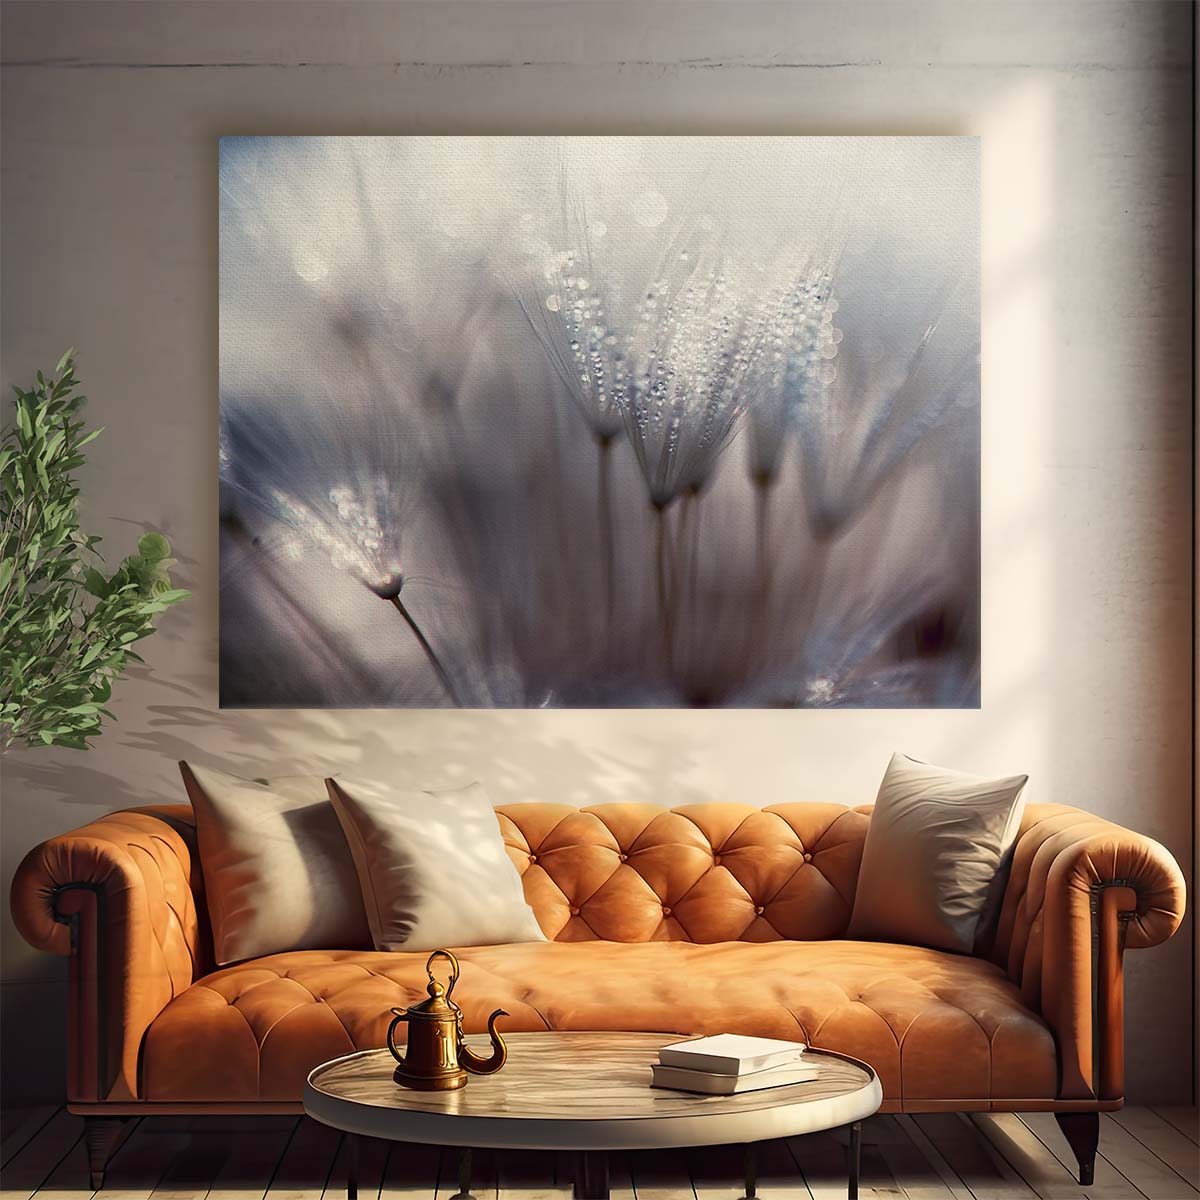 Delicate Dandelion Dewdrop Macro Floral Wall Art by Luxuriance Designs. Made in USA.